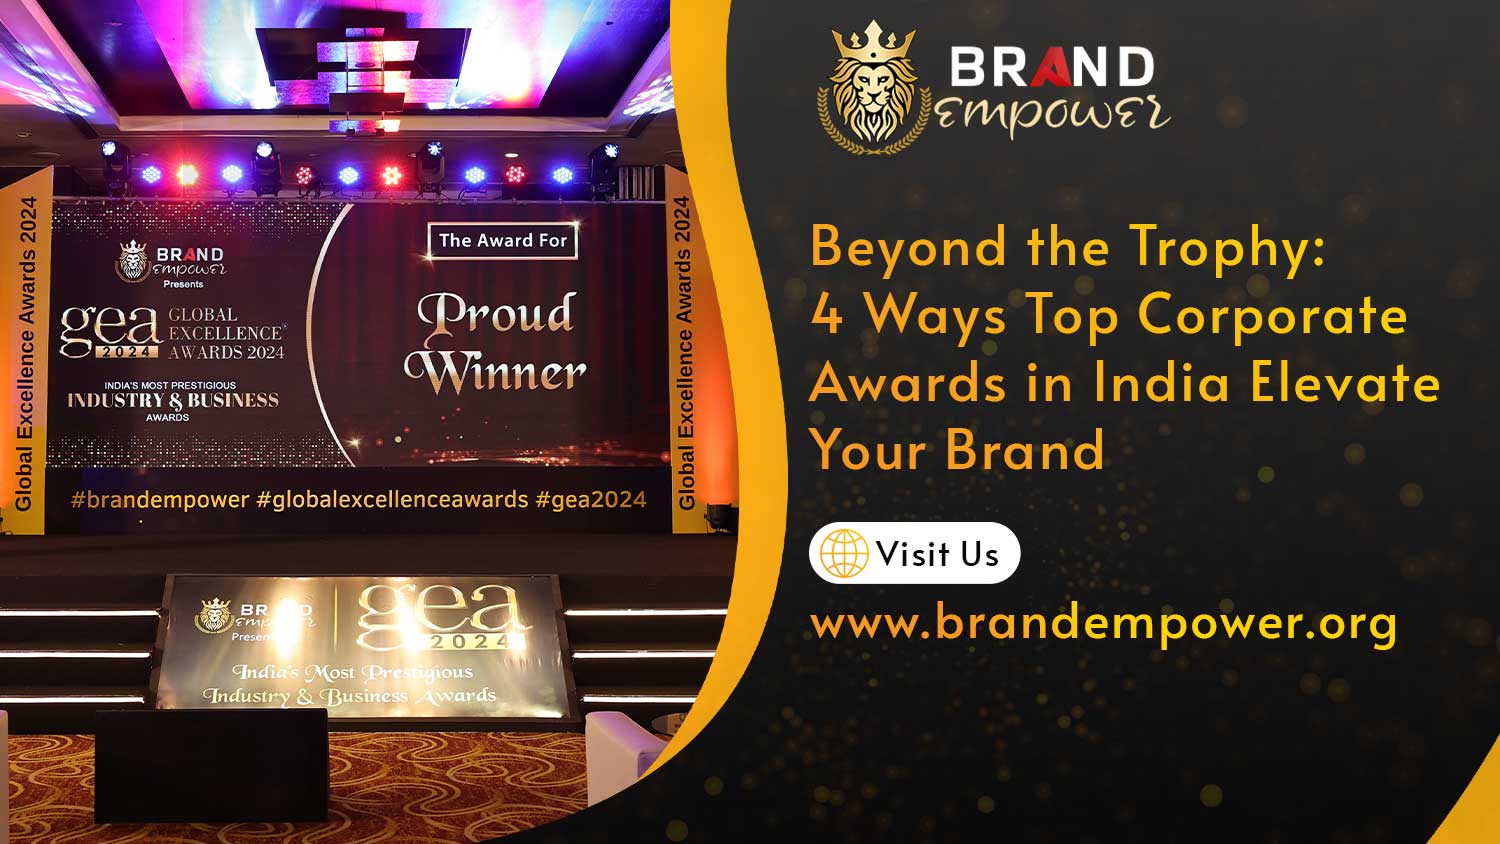 Beyond the Trophy 4 Ways Top Corporate Awards in India Elevate Your Brand